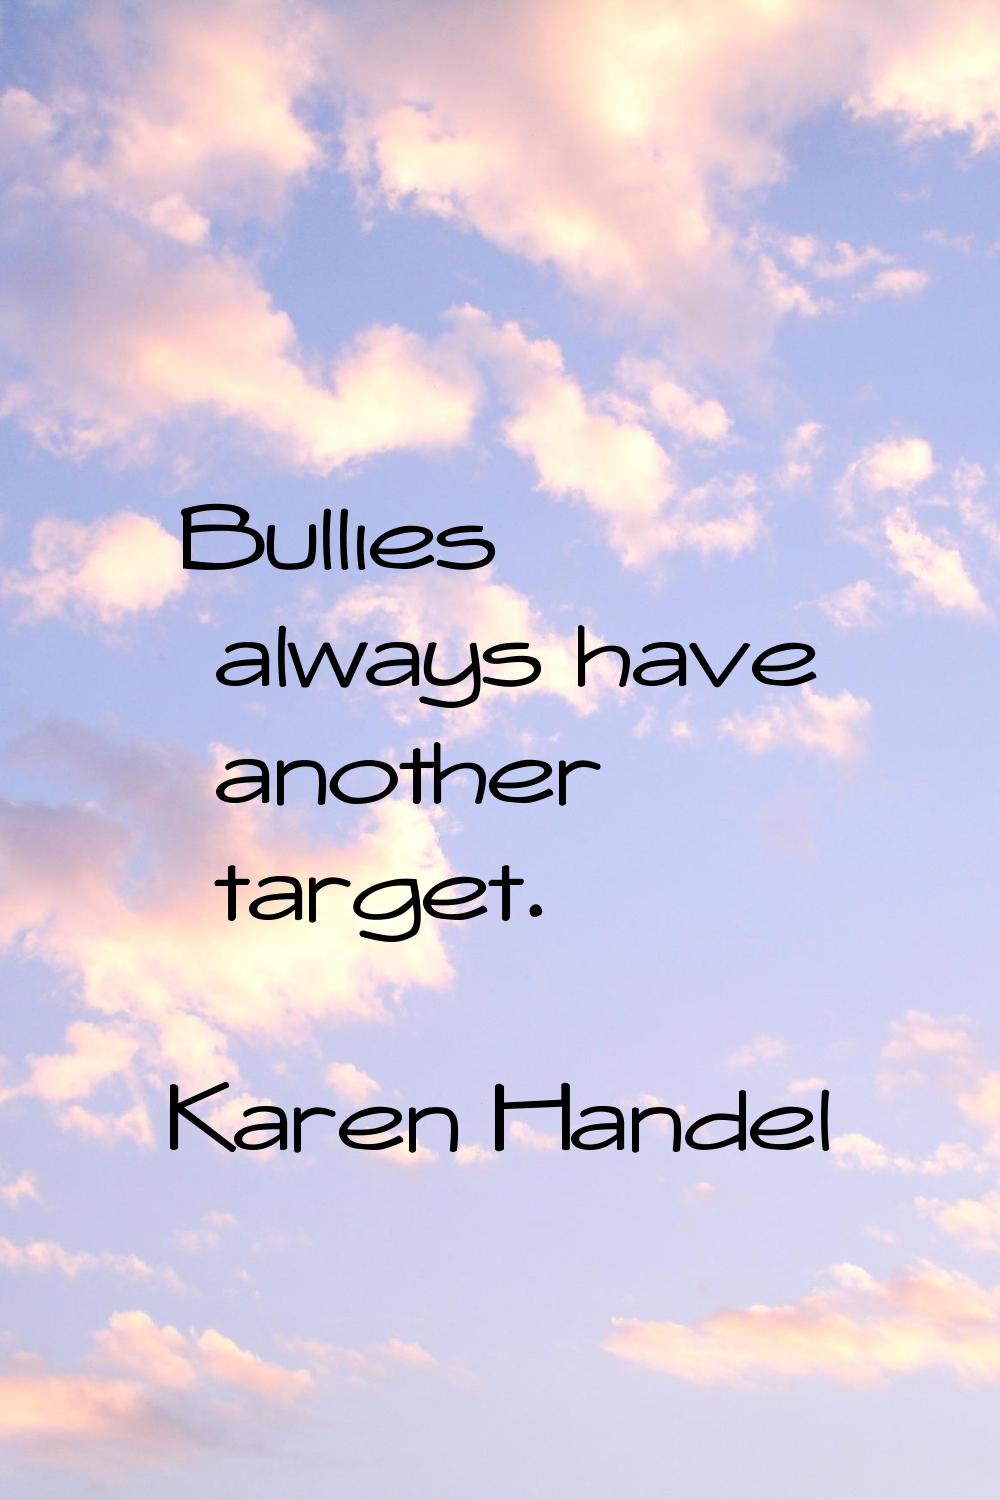 Bullies always have another target.